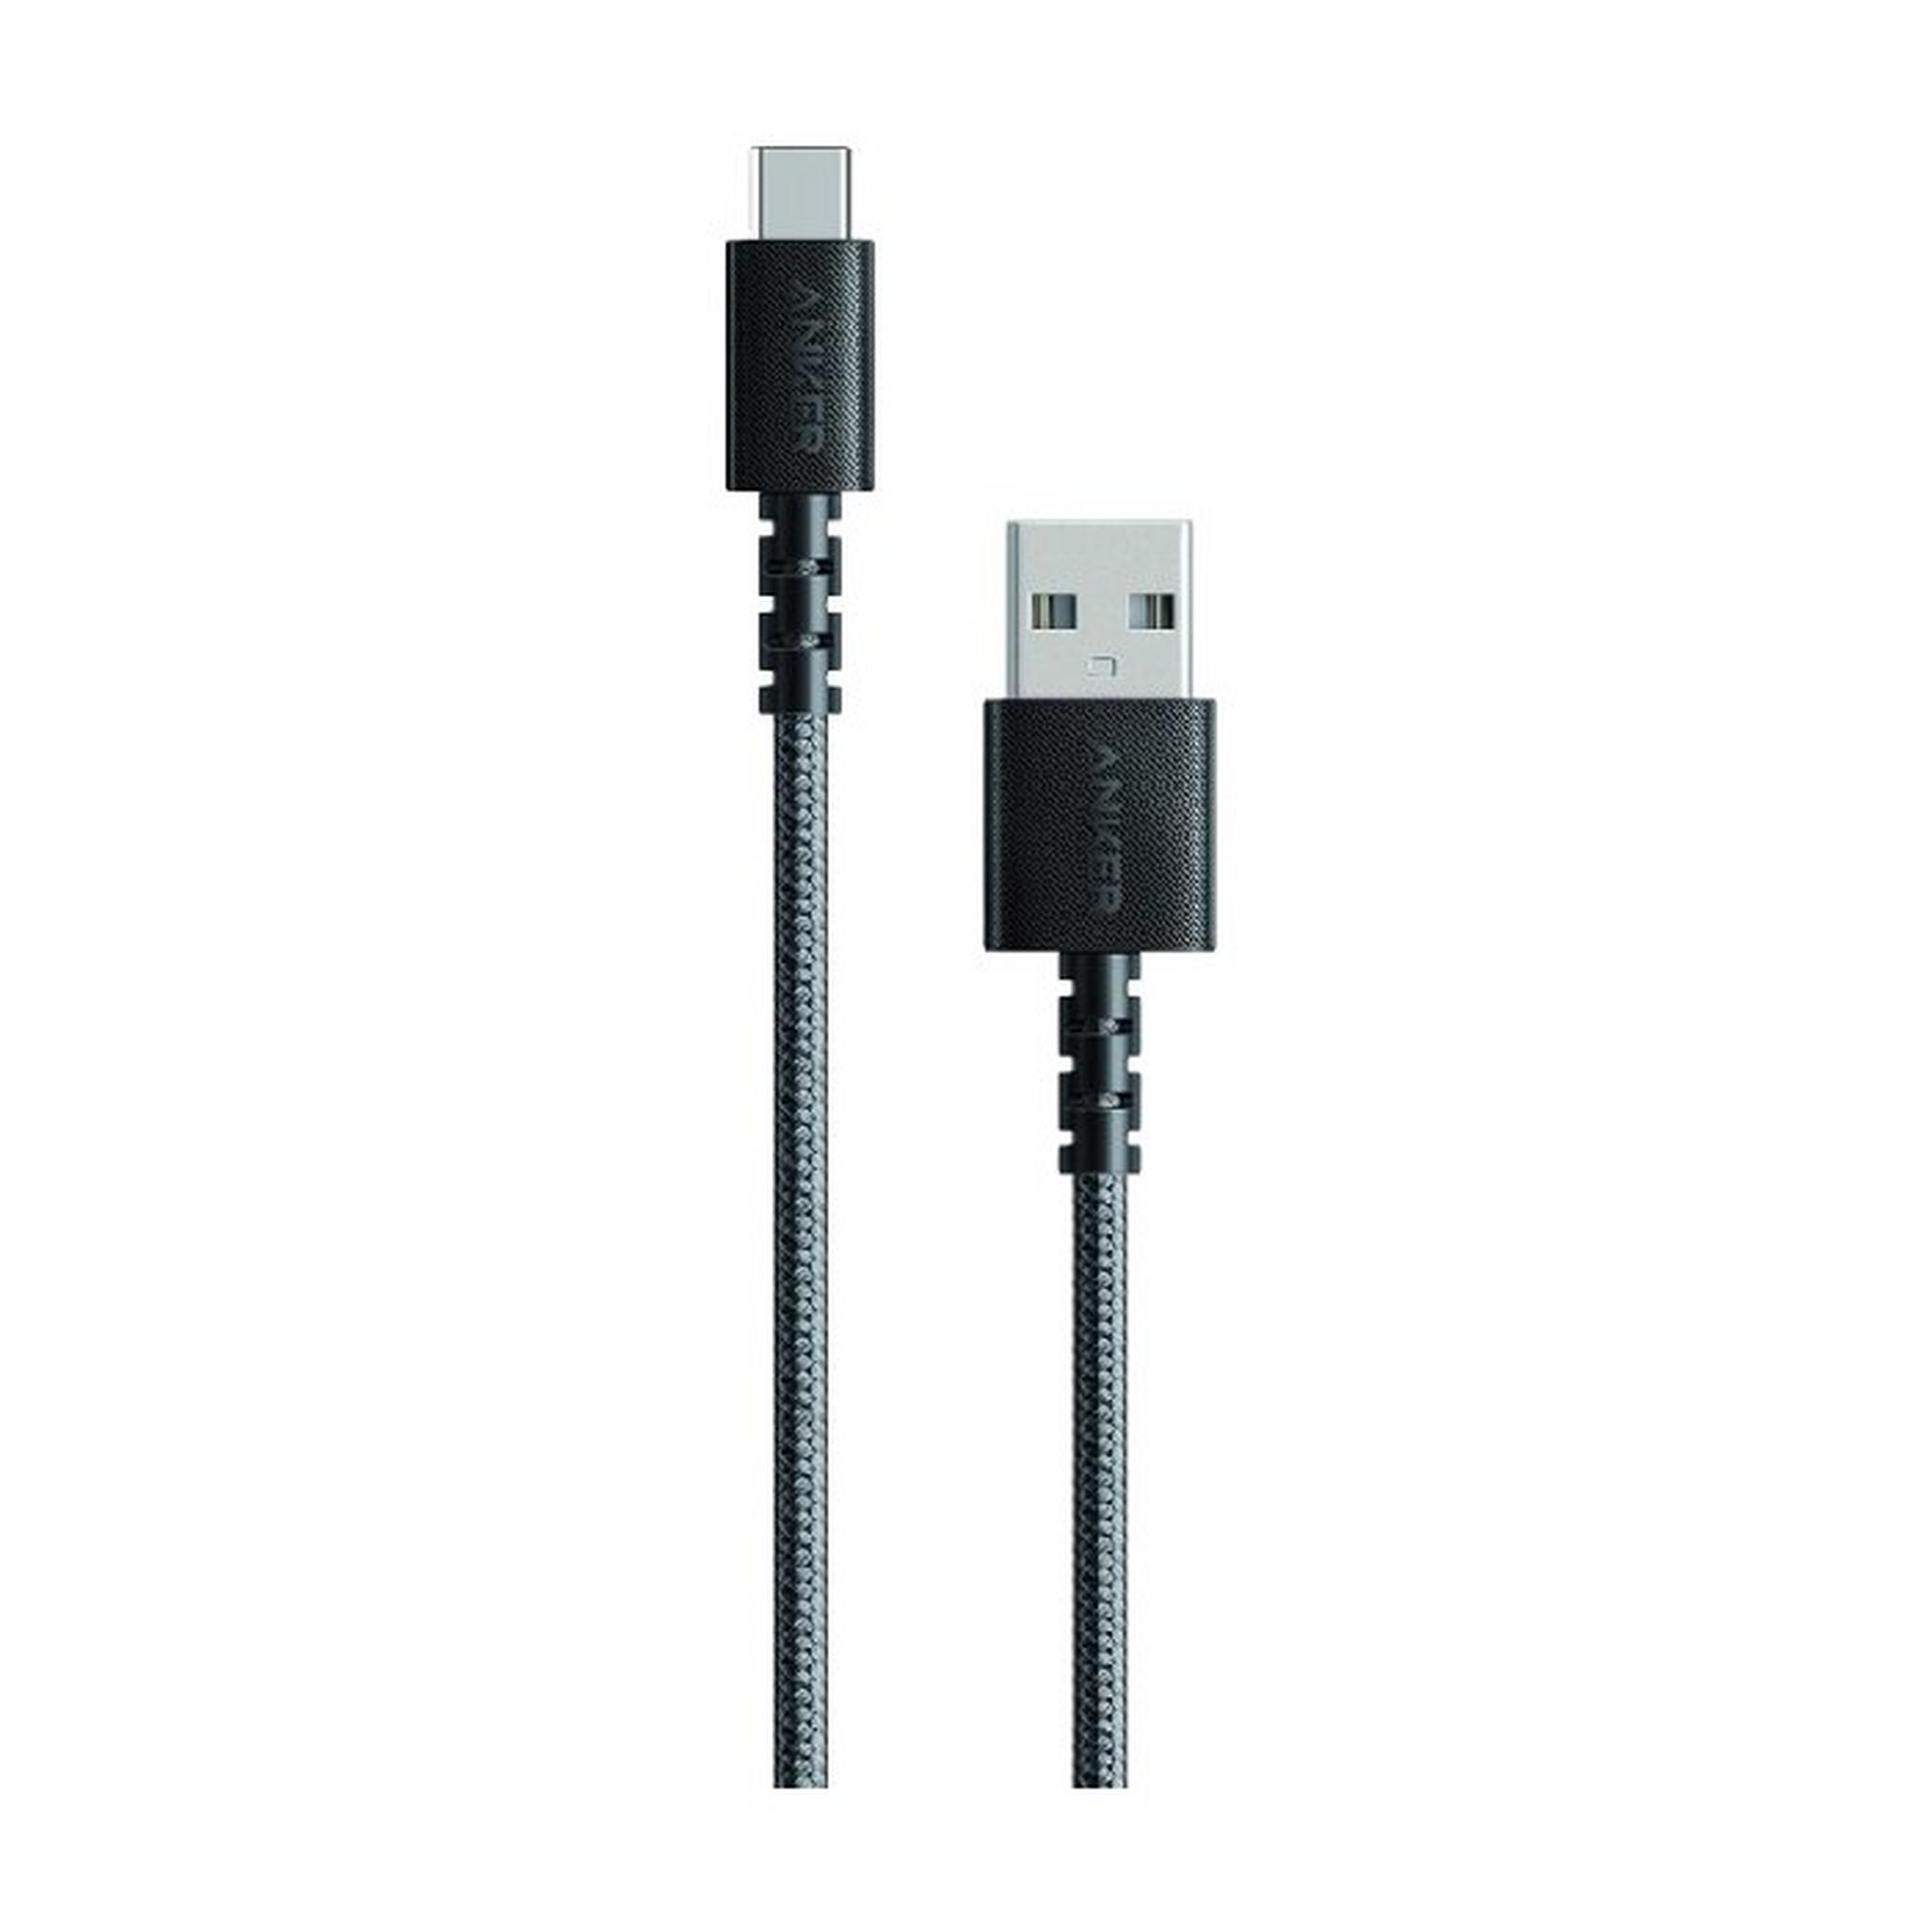 Anker PowerLine USB-A to USB-C Cable 3ft - Black